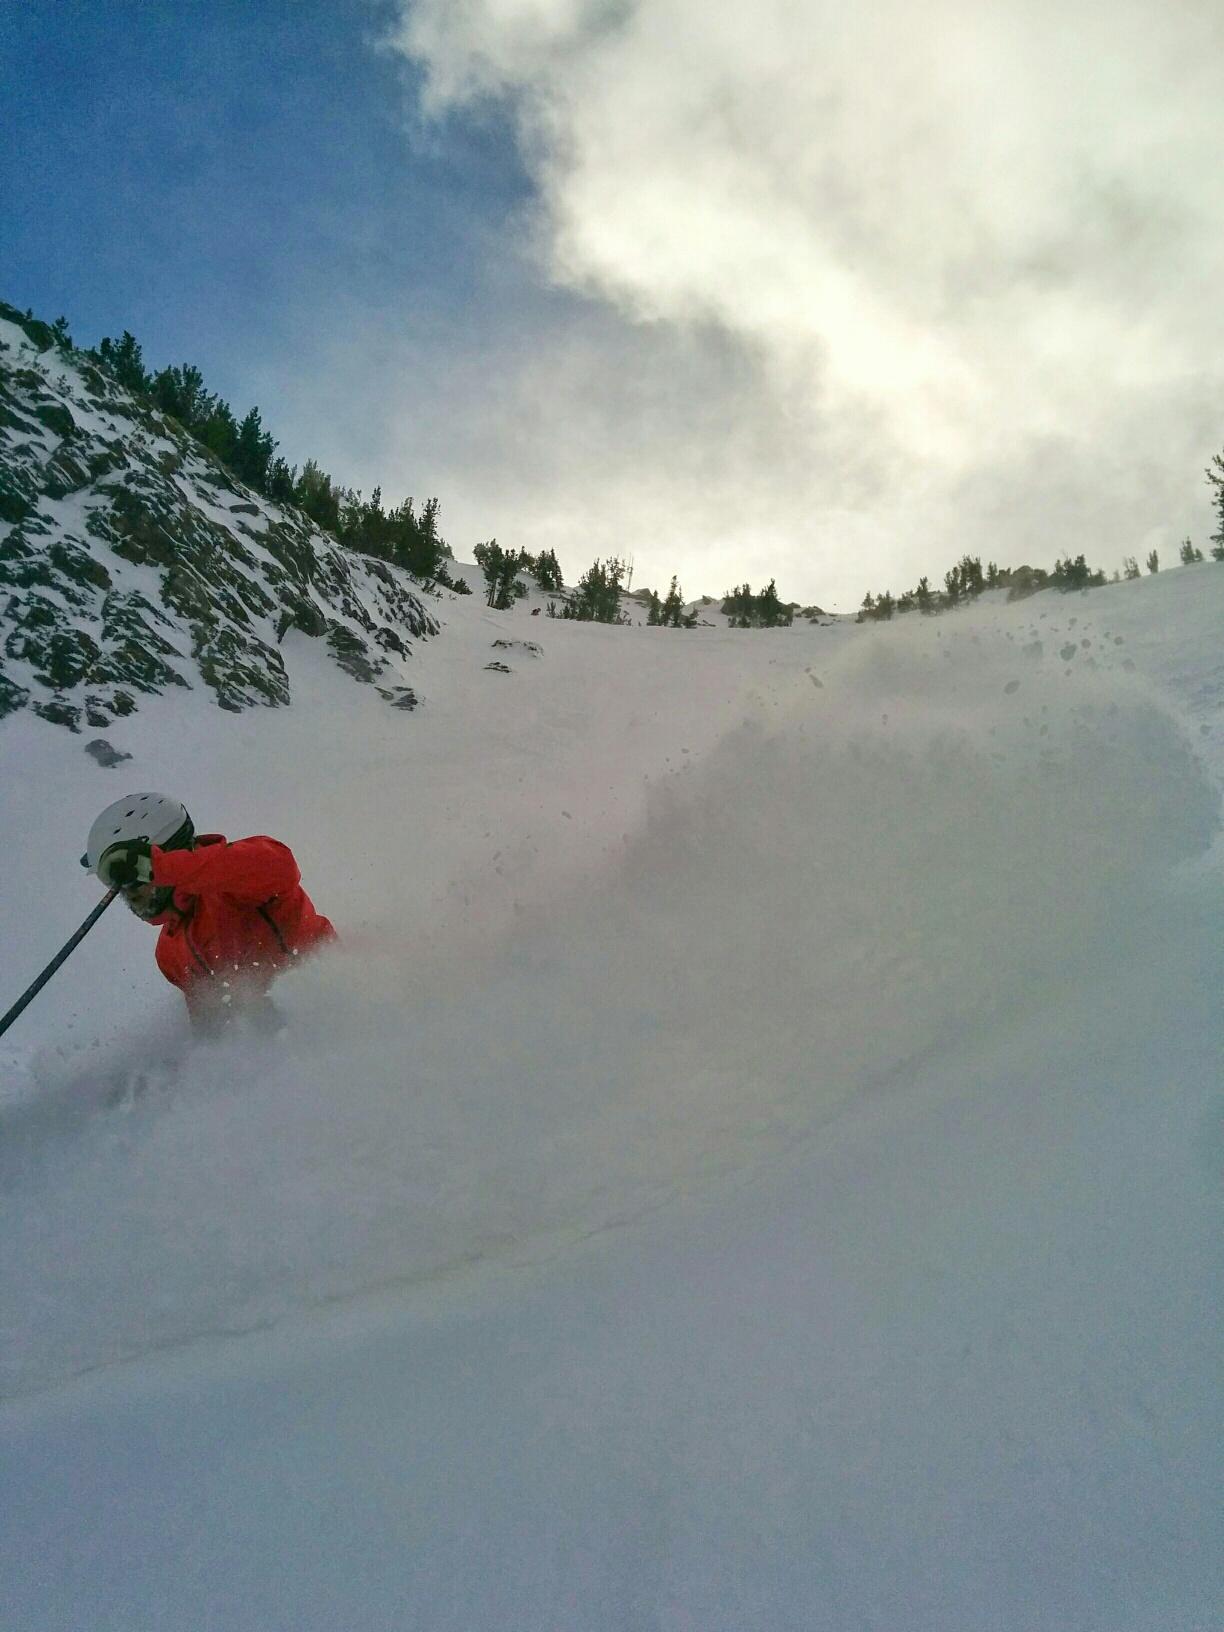 The Avy Chutes were just one of many great places to find the goods the past few days. 